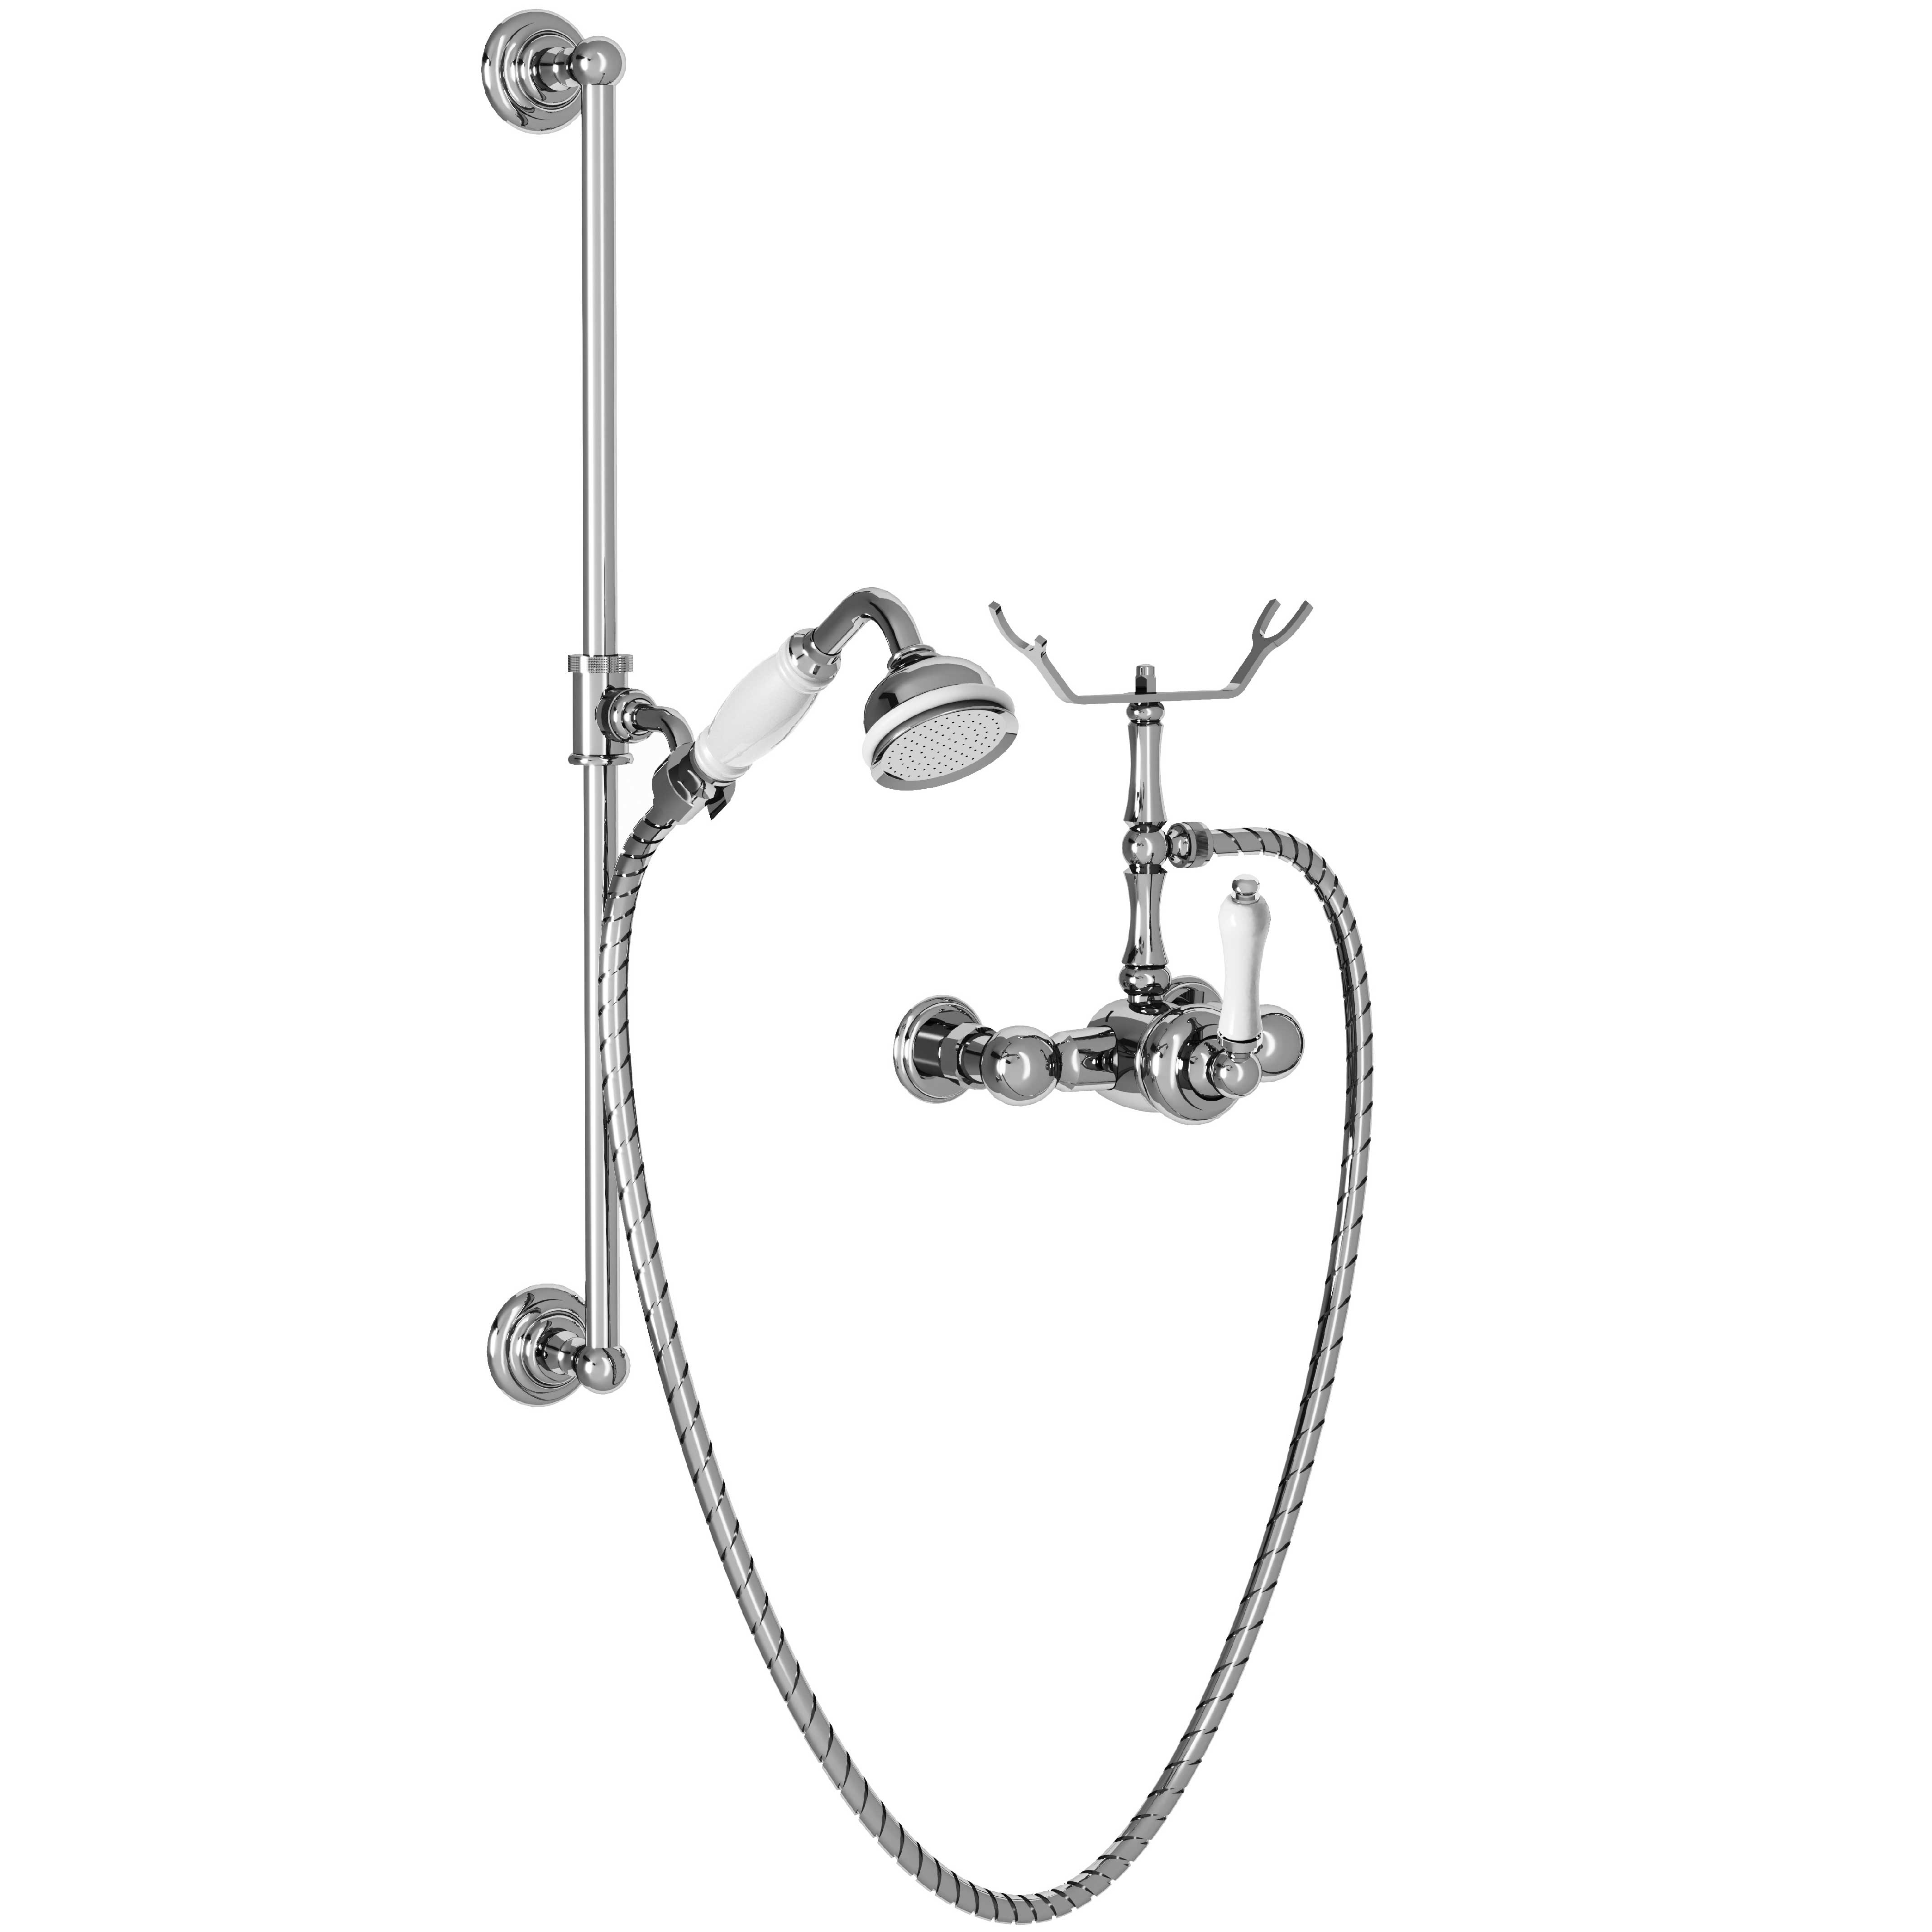 M04-2202M Single-lever shower mixer with sliding bar